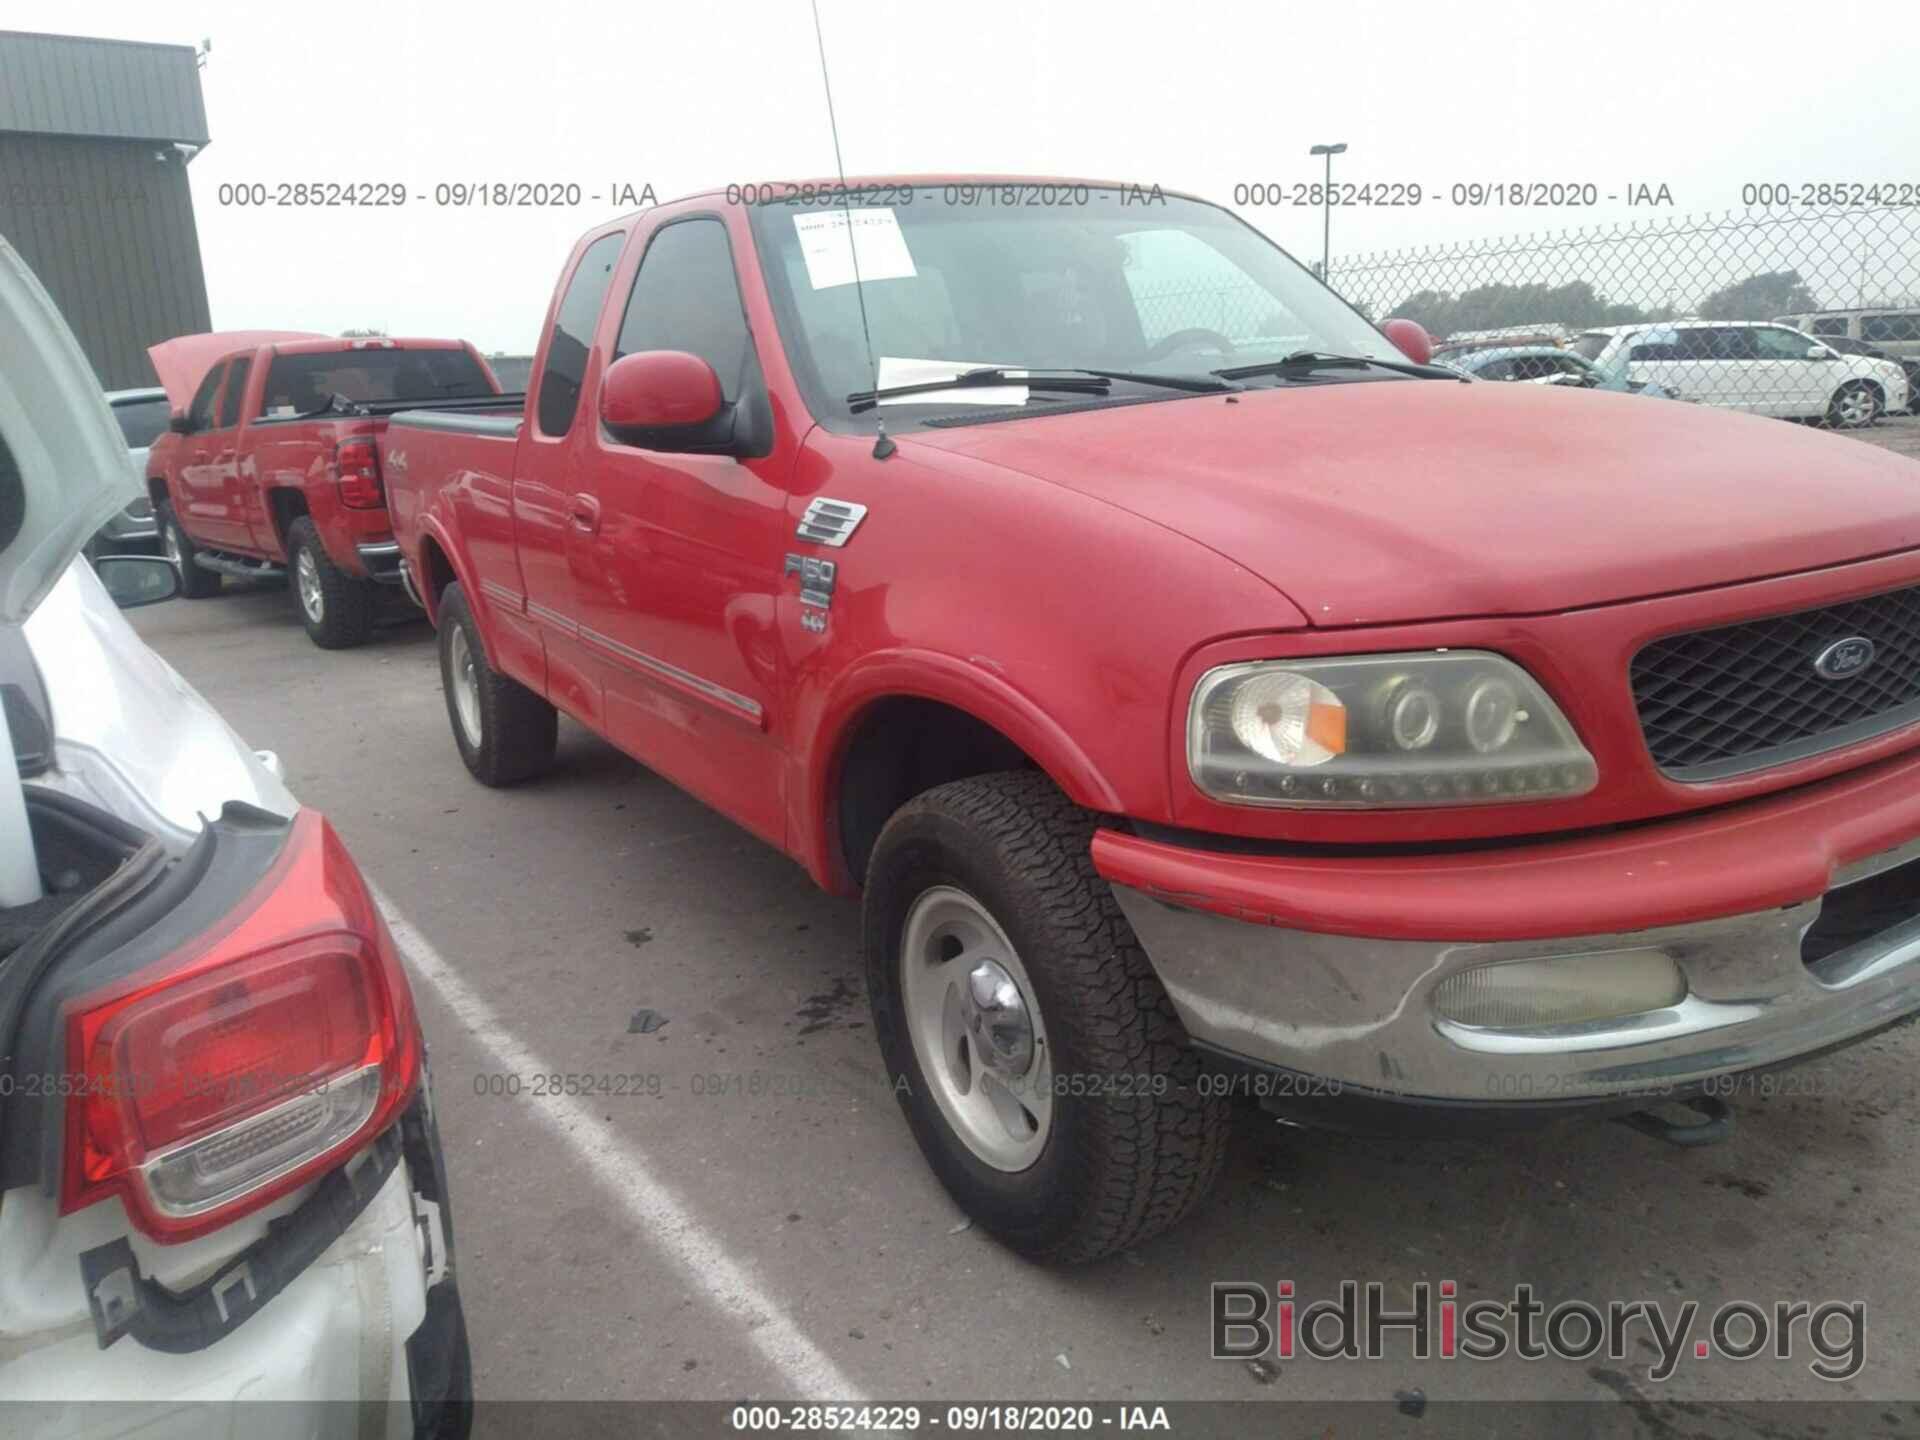 Photo 2FTZX18WXWCA72780 - FORD F-150 1998